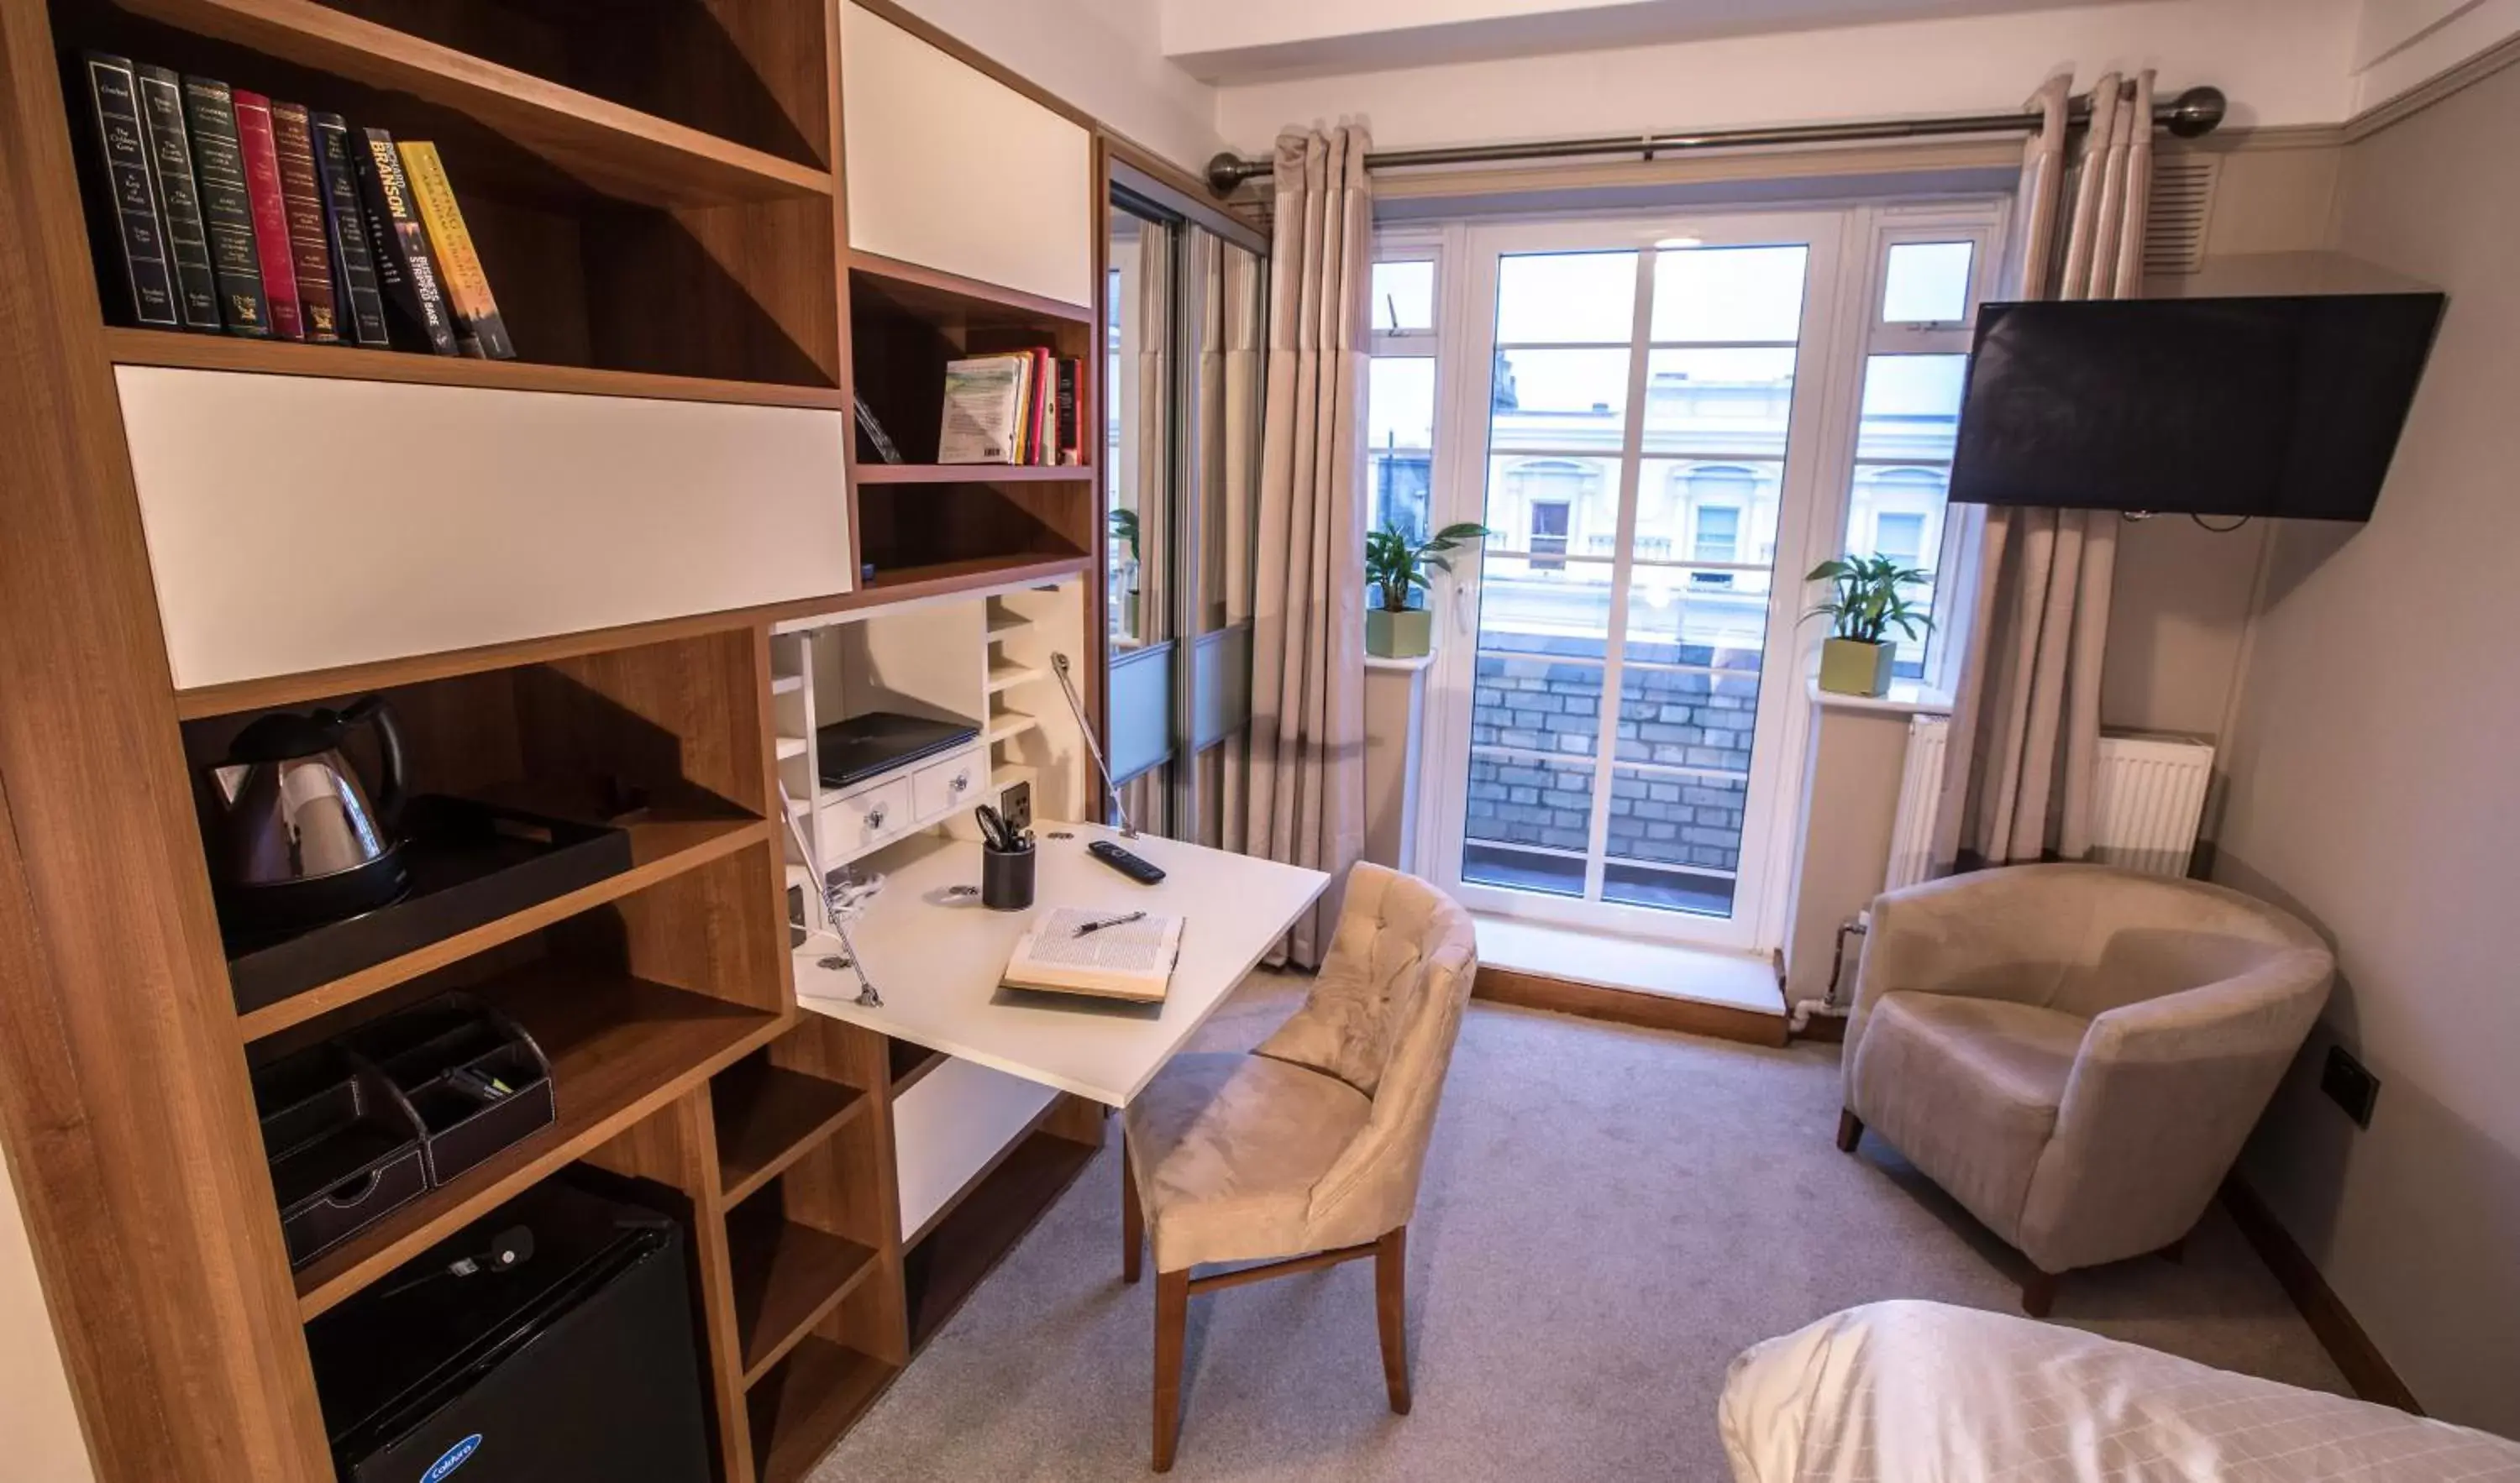 Superior Single Room - single occupancy in Vincent House London Residence